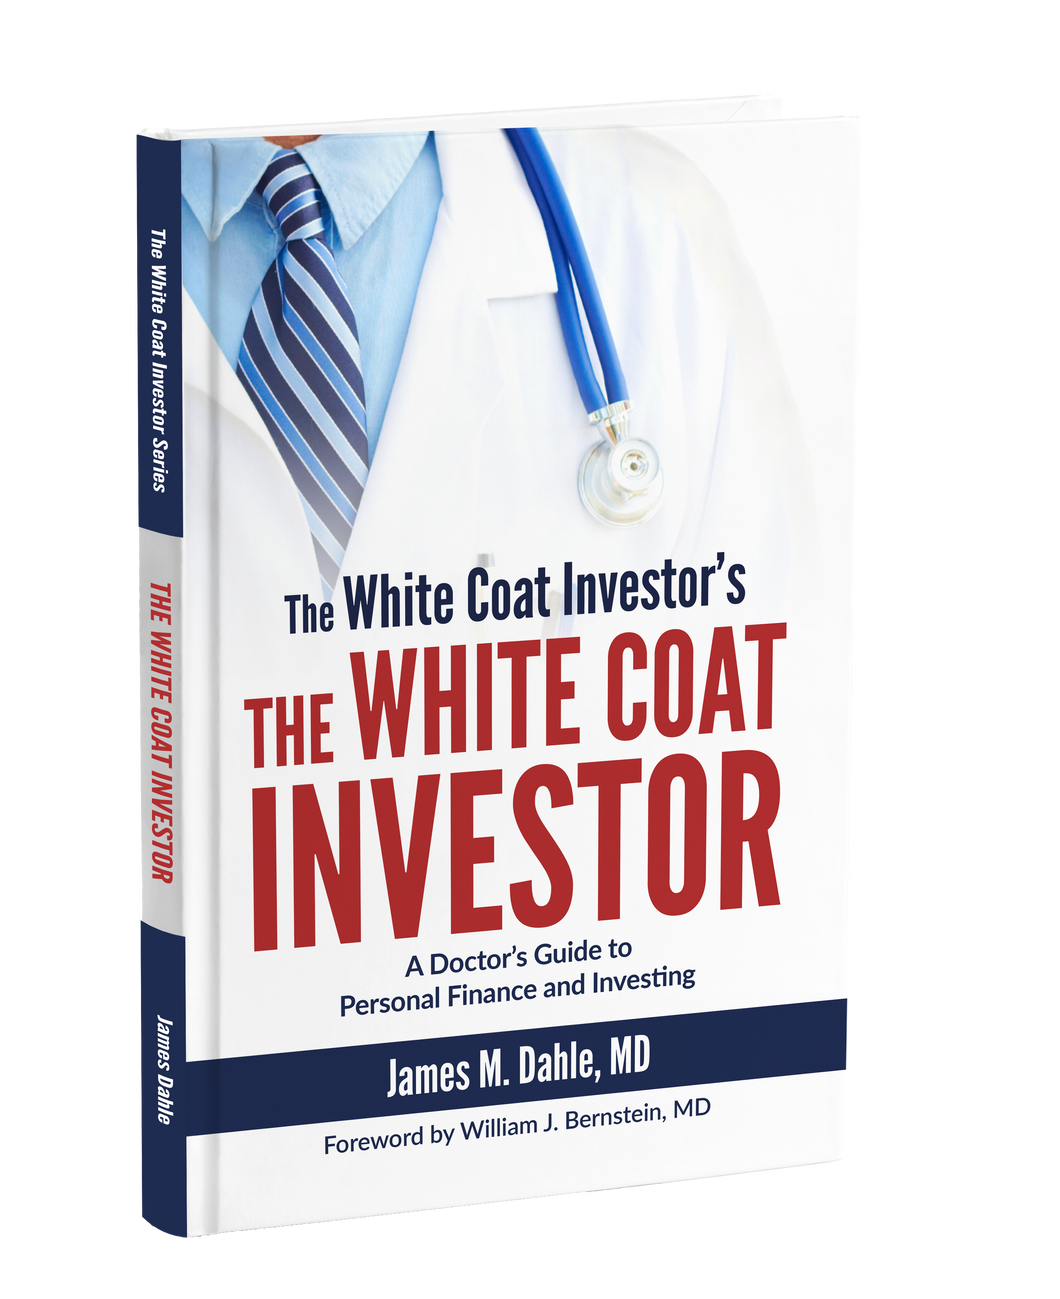 Book: A Doctor's Guide to Personal Finance and Investing